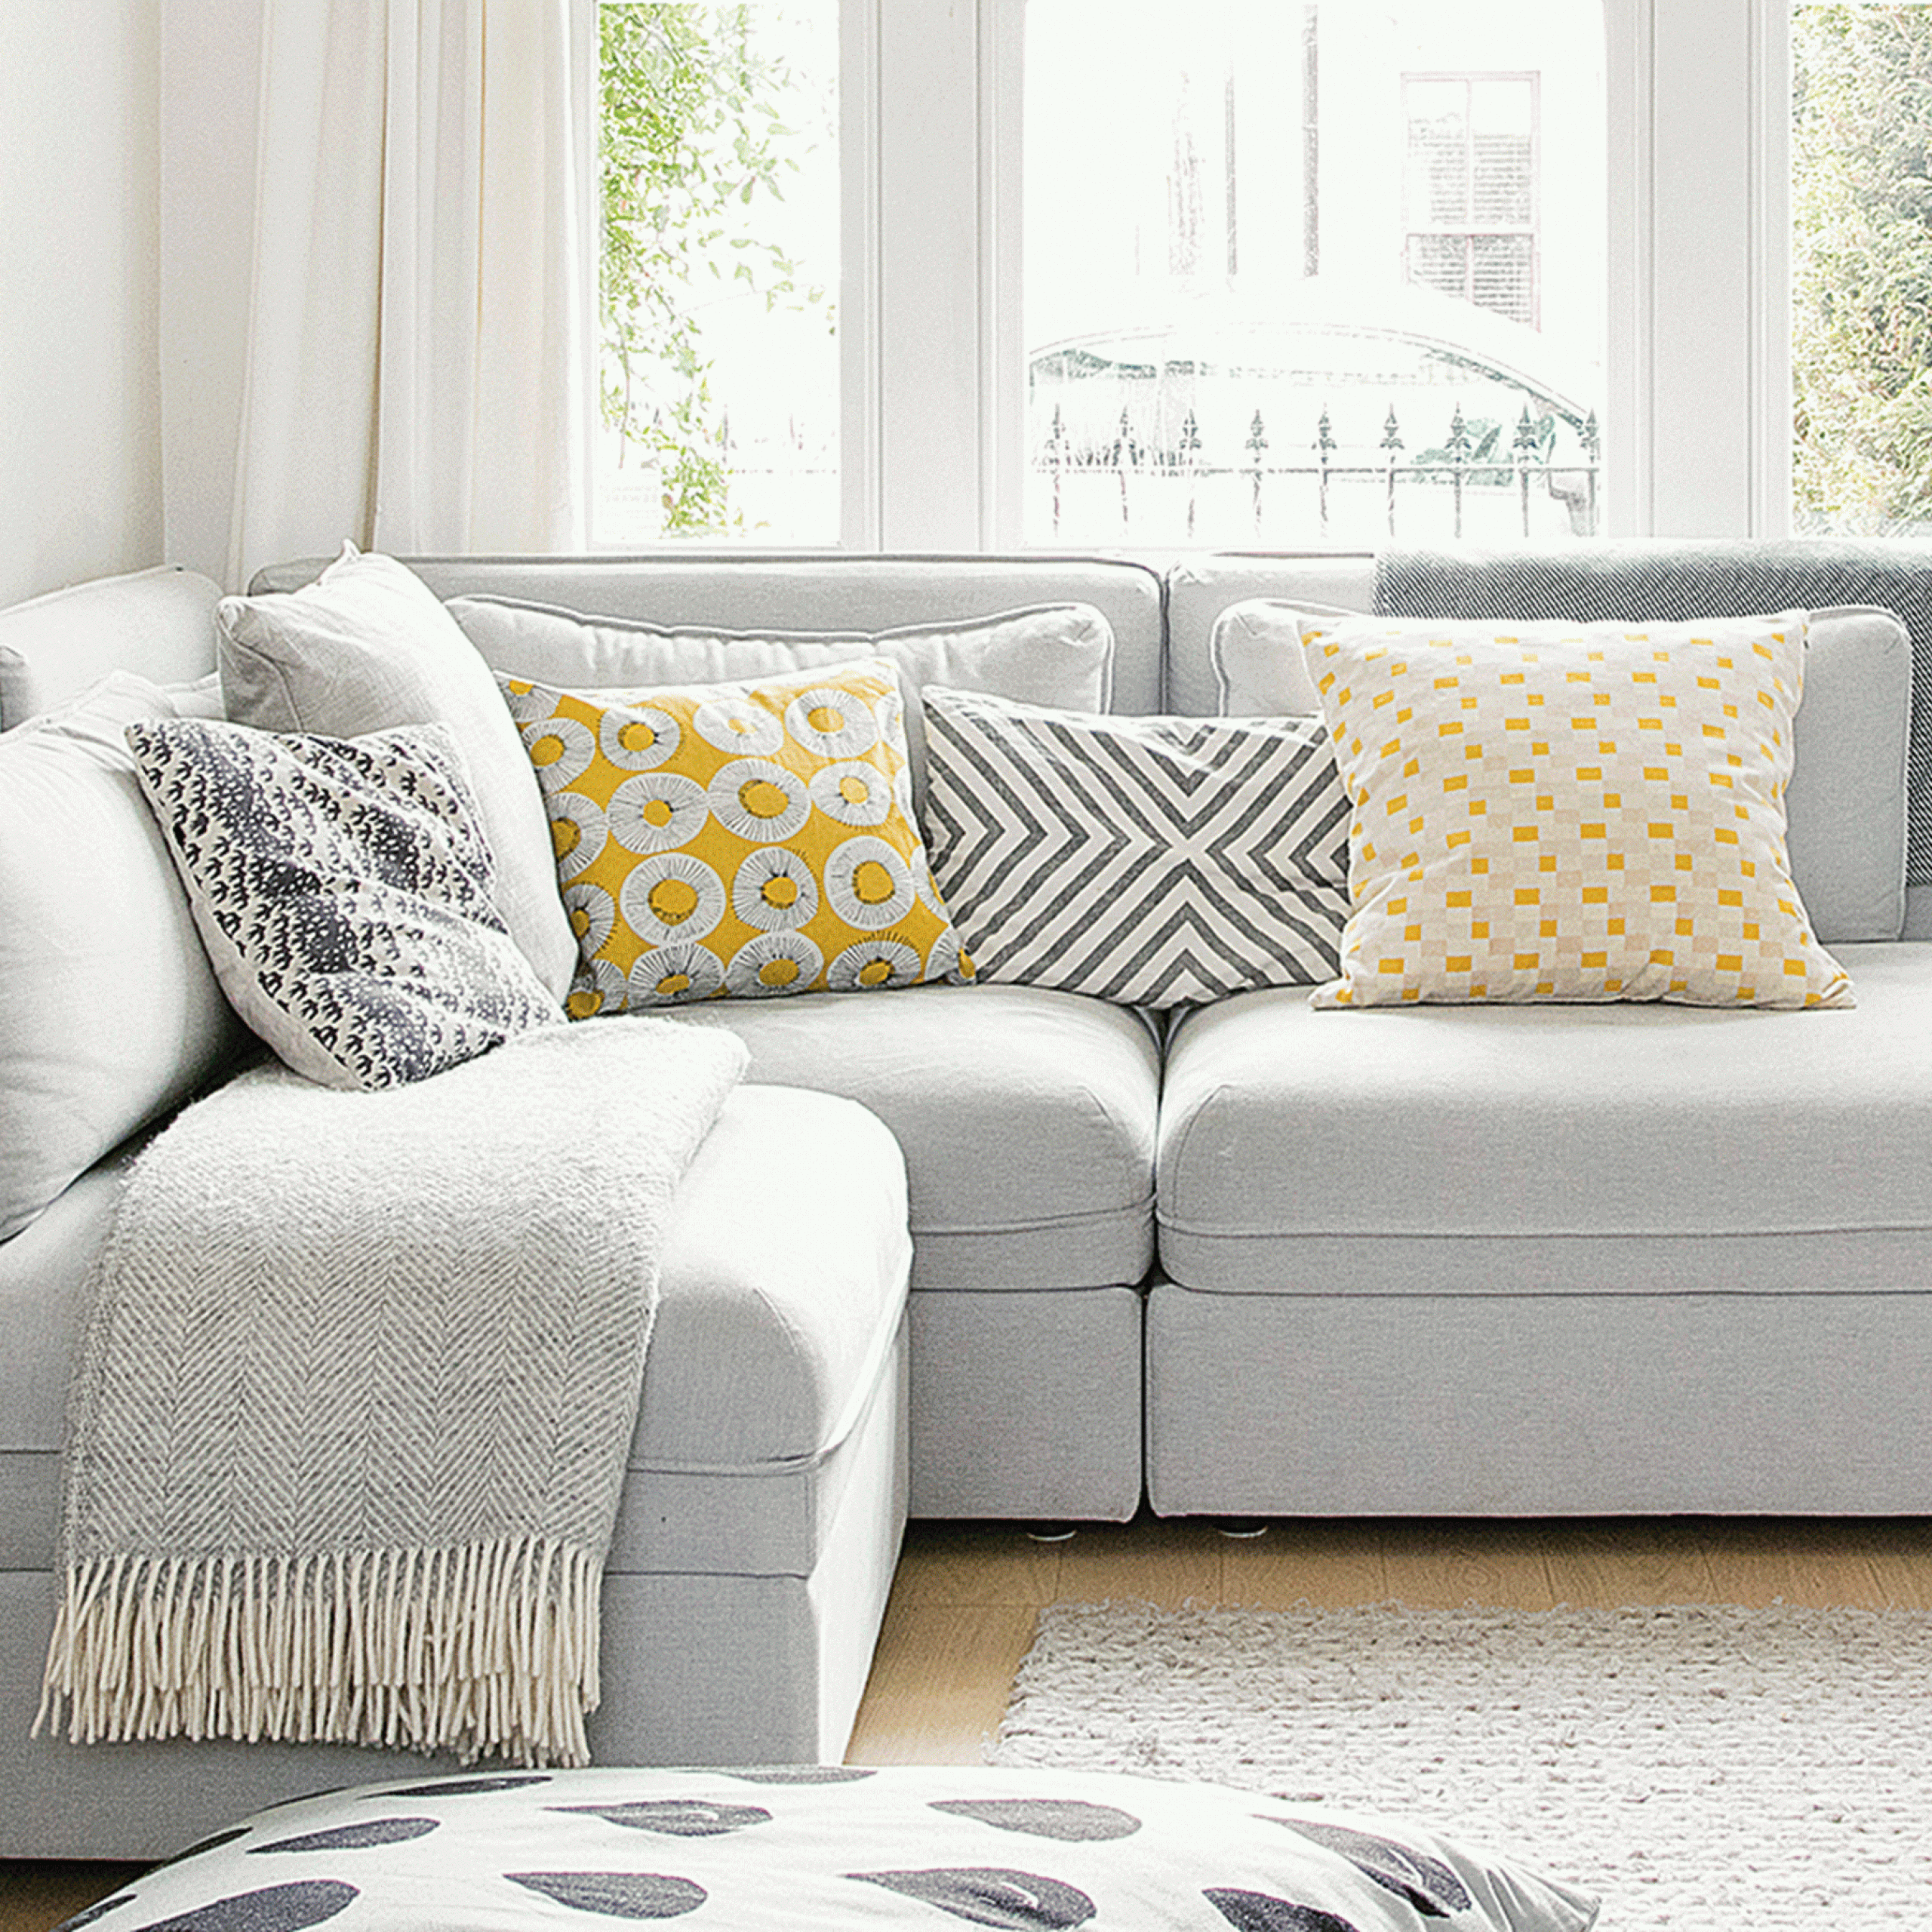 16 Sofa Ideas For Small Living Rooms: Looks, Styles And Tips | Ideal Home With Sofas For Small Spaces (View 3 of 15)